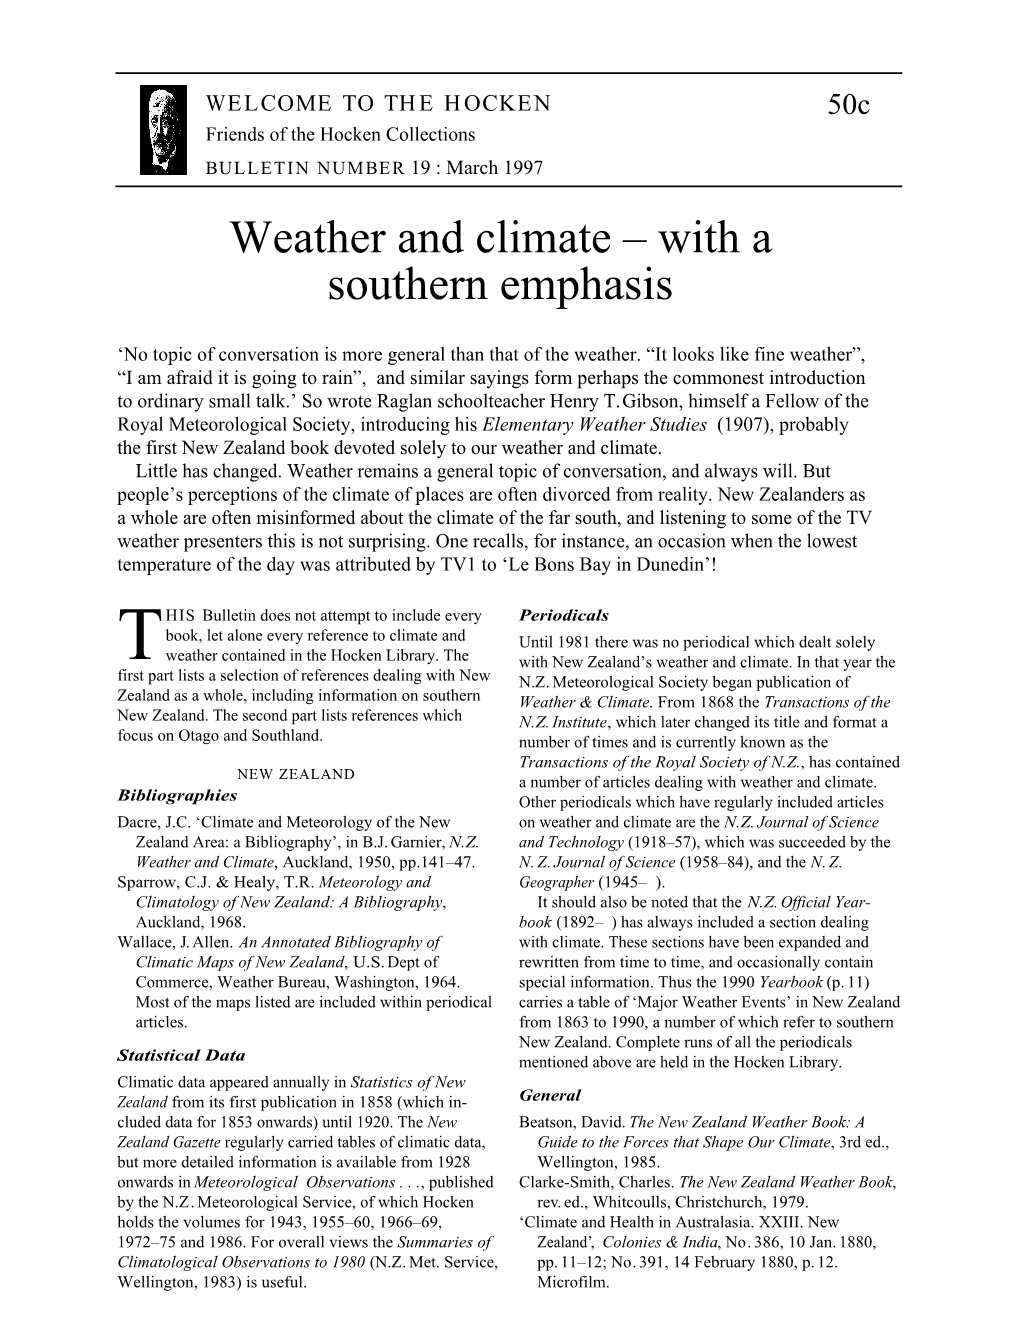 Weather and Climate – with a Southern Emphasis